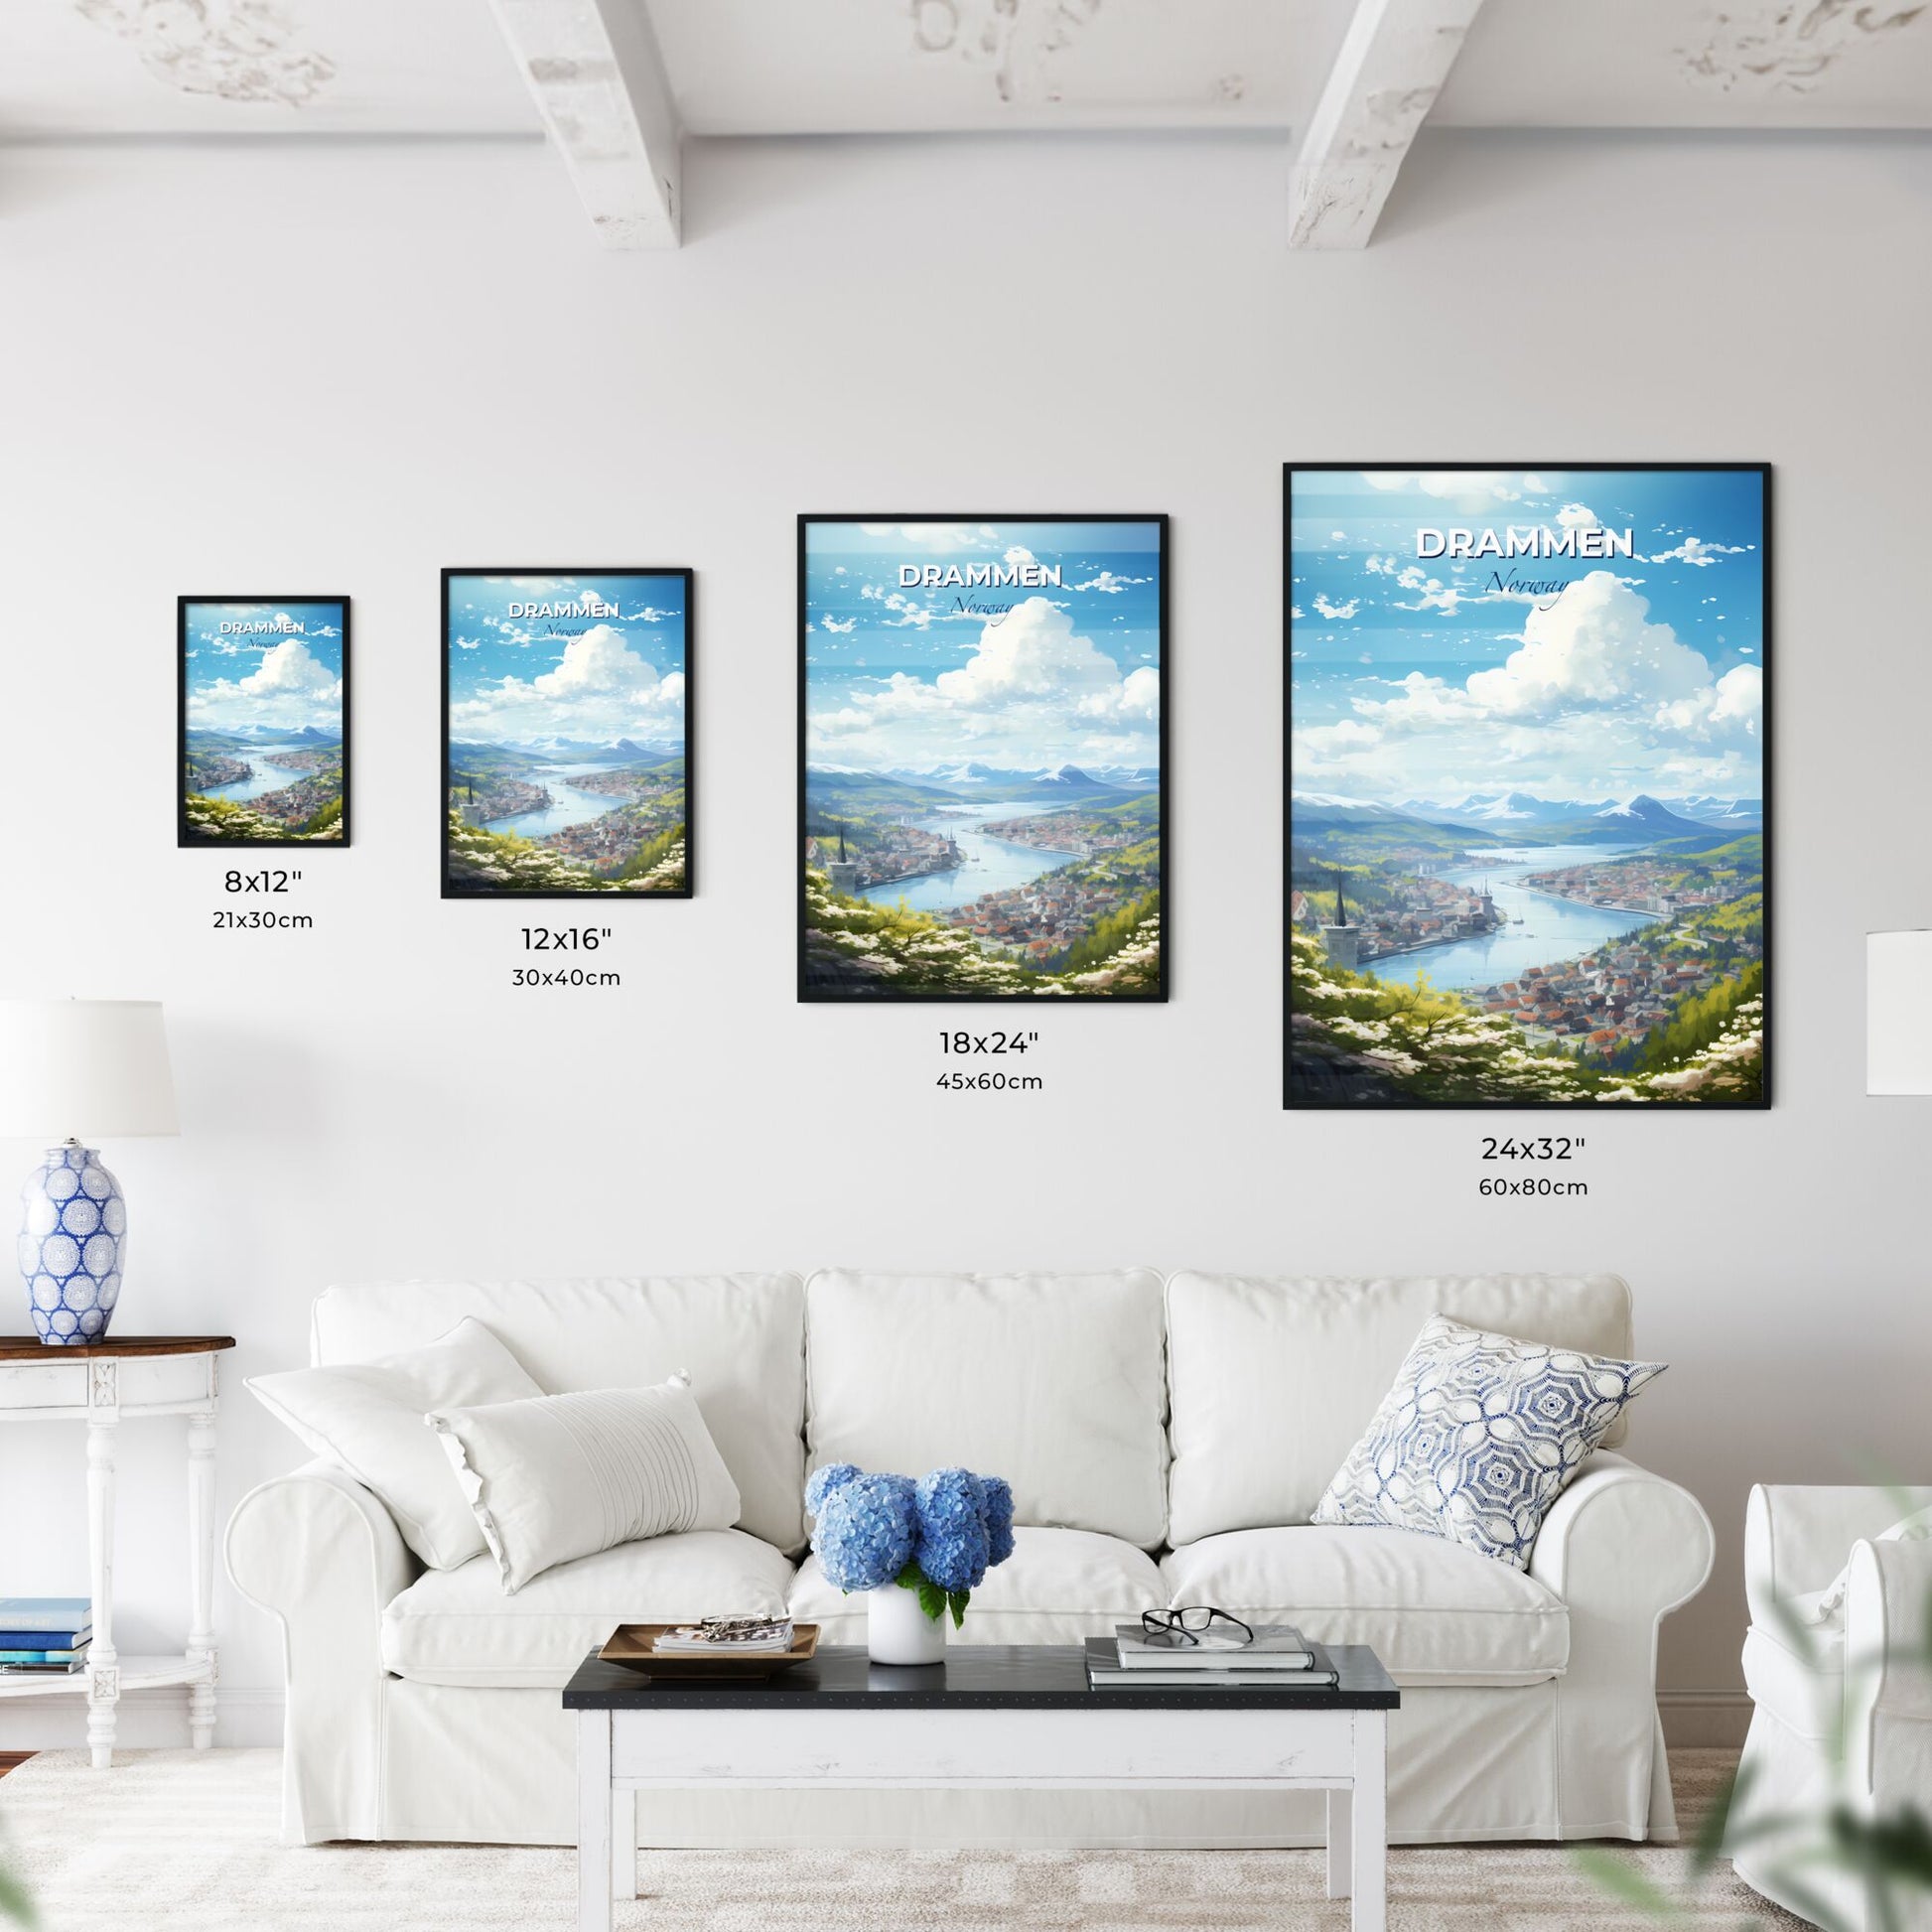 Drammen Norway Skyline - A City Next To A River - Customizable Travel Gift Default Title